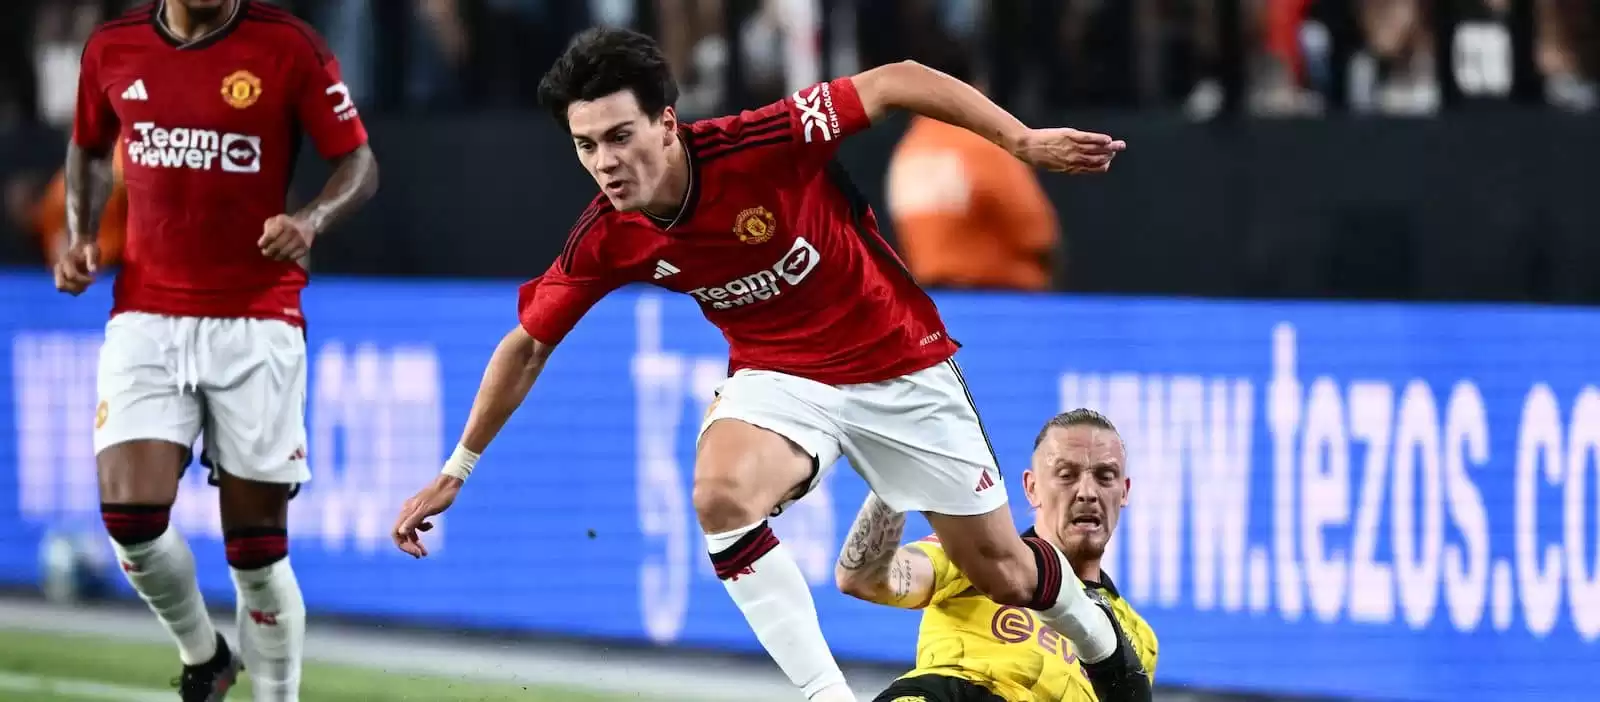 Facundo Pellistri excels in Manchester United's defeat to Borussia Dortmund - Man United News And Transfer News